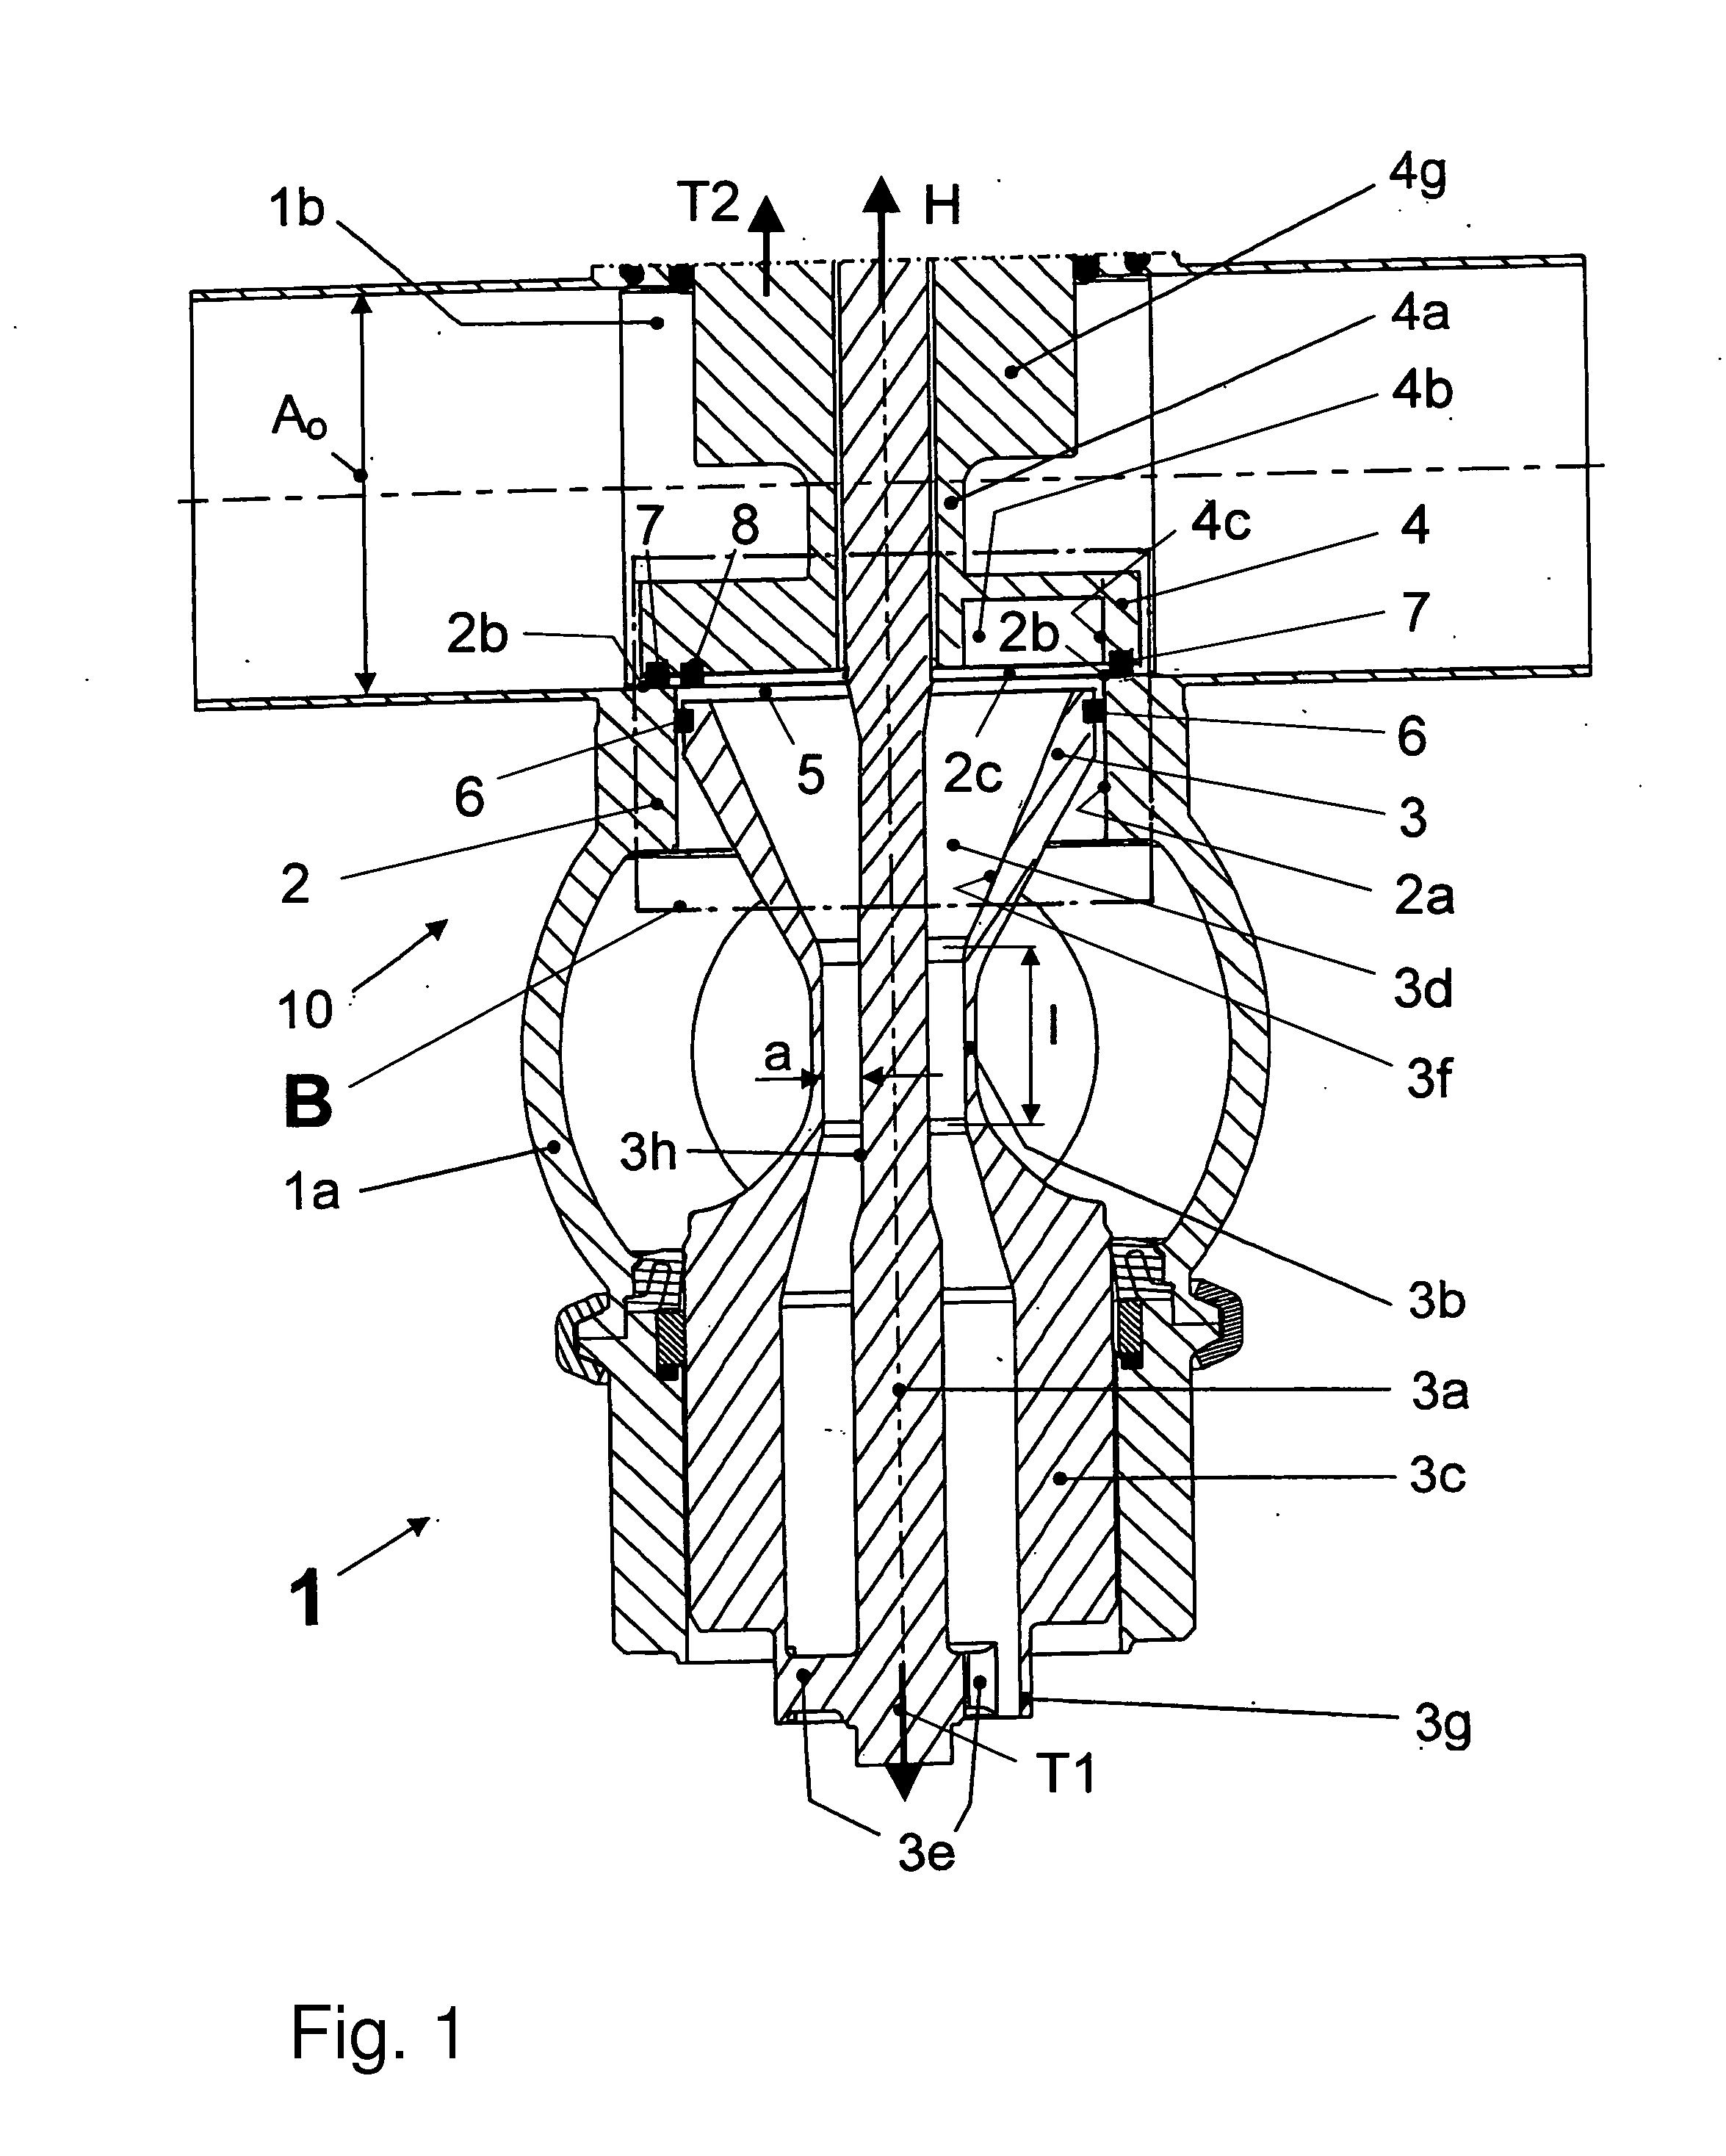 Double-seat valve with a seat-cleaning function